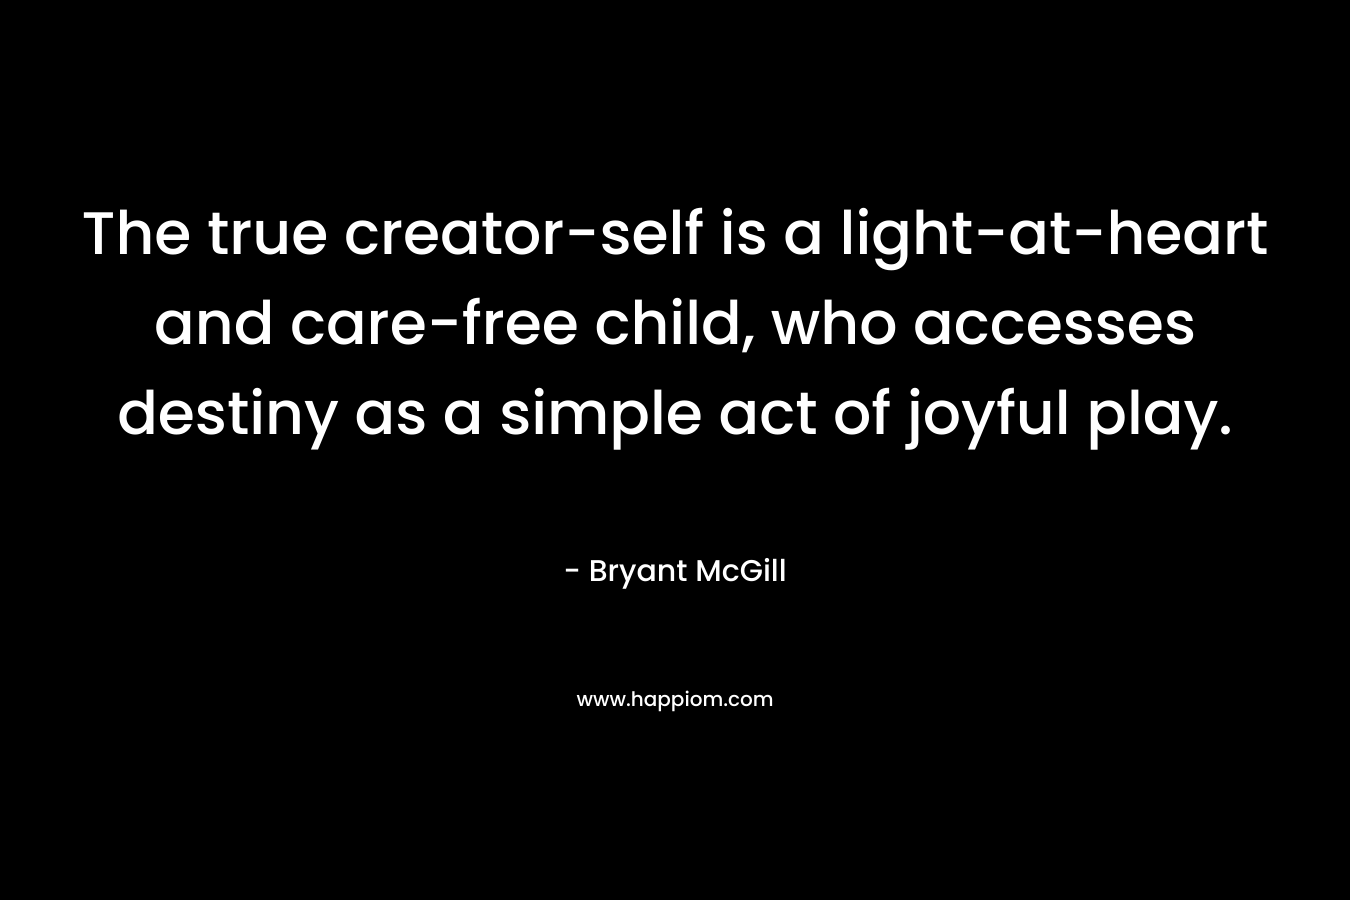 The true creator-self is a light-at-heart and care-free child, who accesses destiny as a simple act of joyful play.